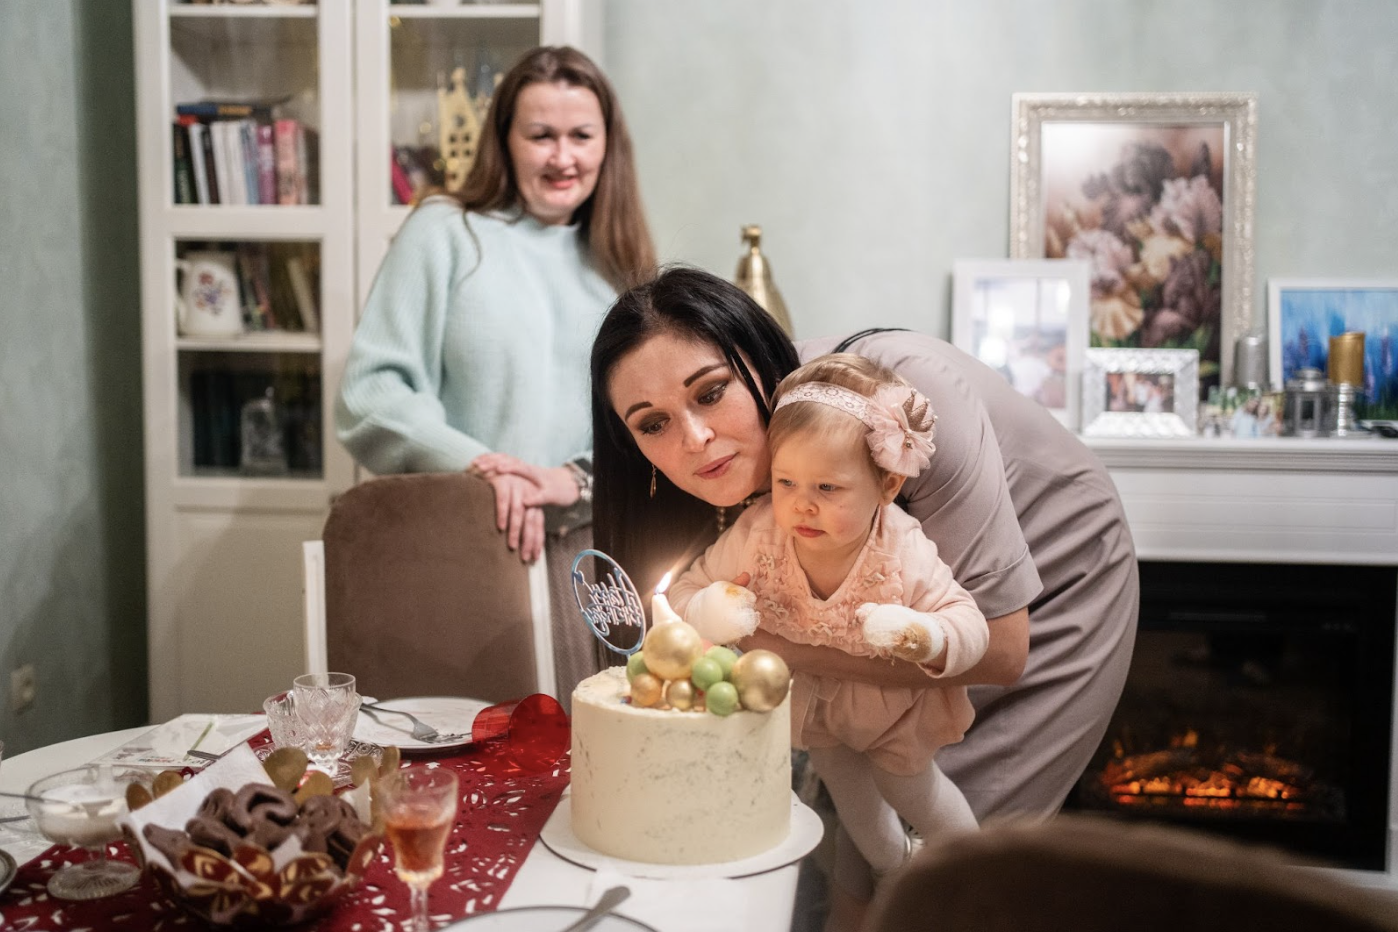 A woman holds her baby over a birthday cake and helps the baby blow the candles out.